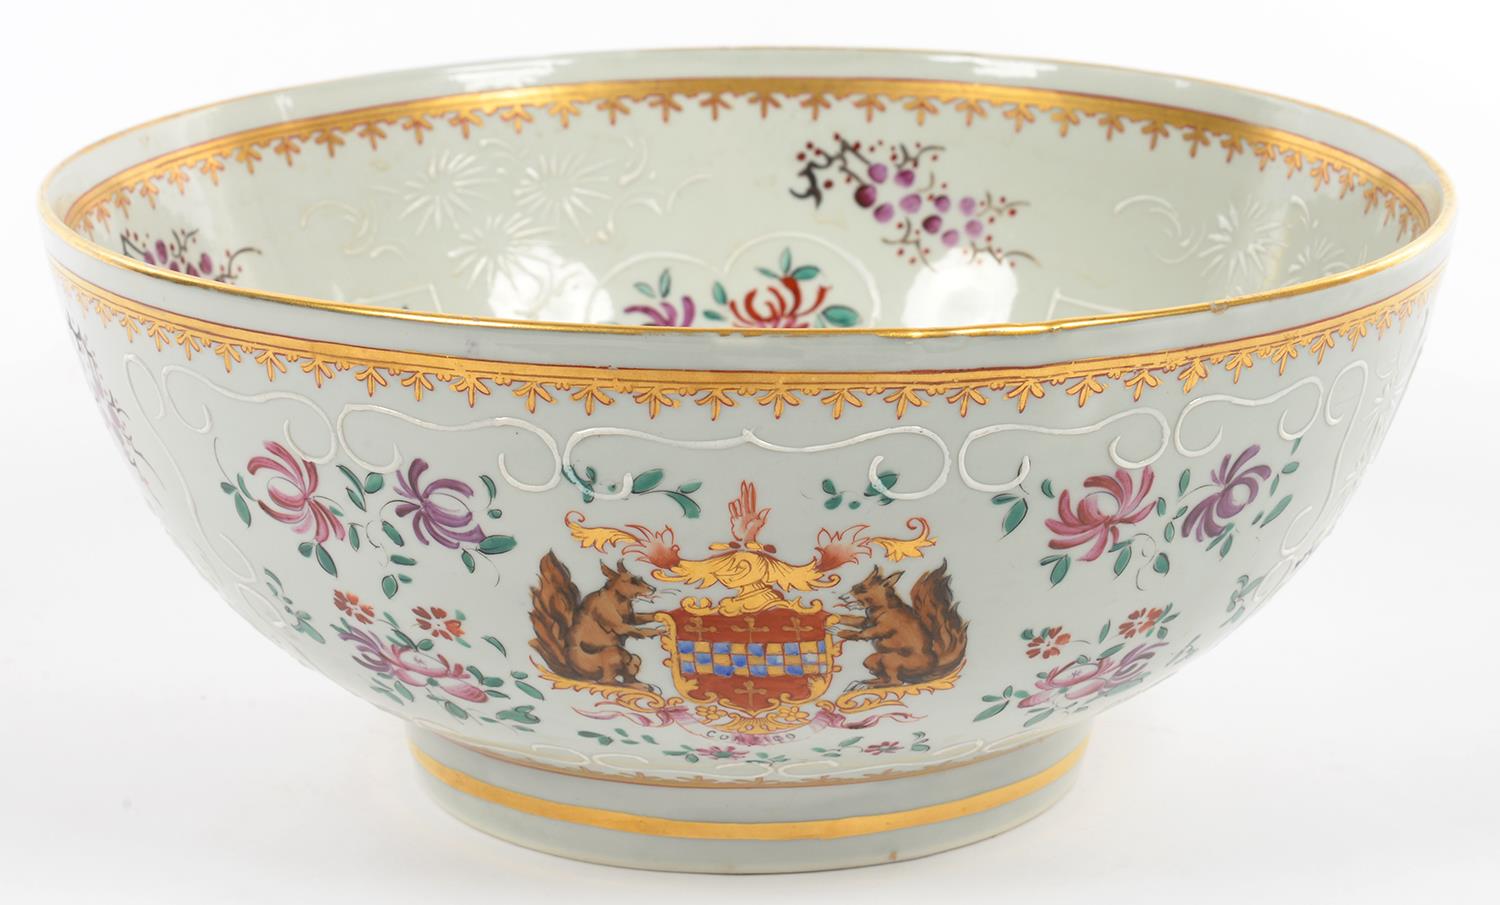 A SAMSON TYPE CHINESE EXPORT PORCELAIN FAMILLE ROSE PUNCH BOWL BOWL, 28.5CM DIAM, PAINTED L IN